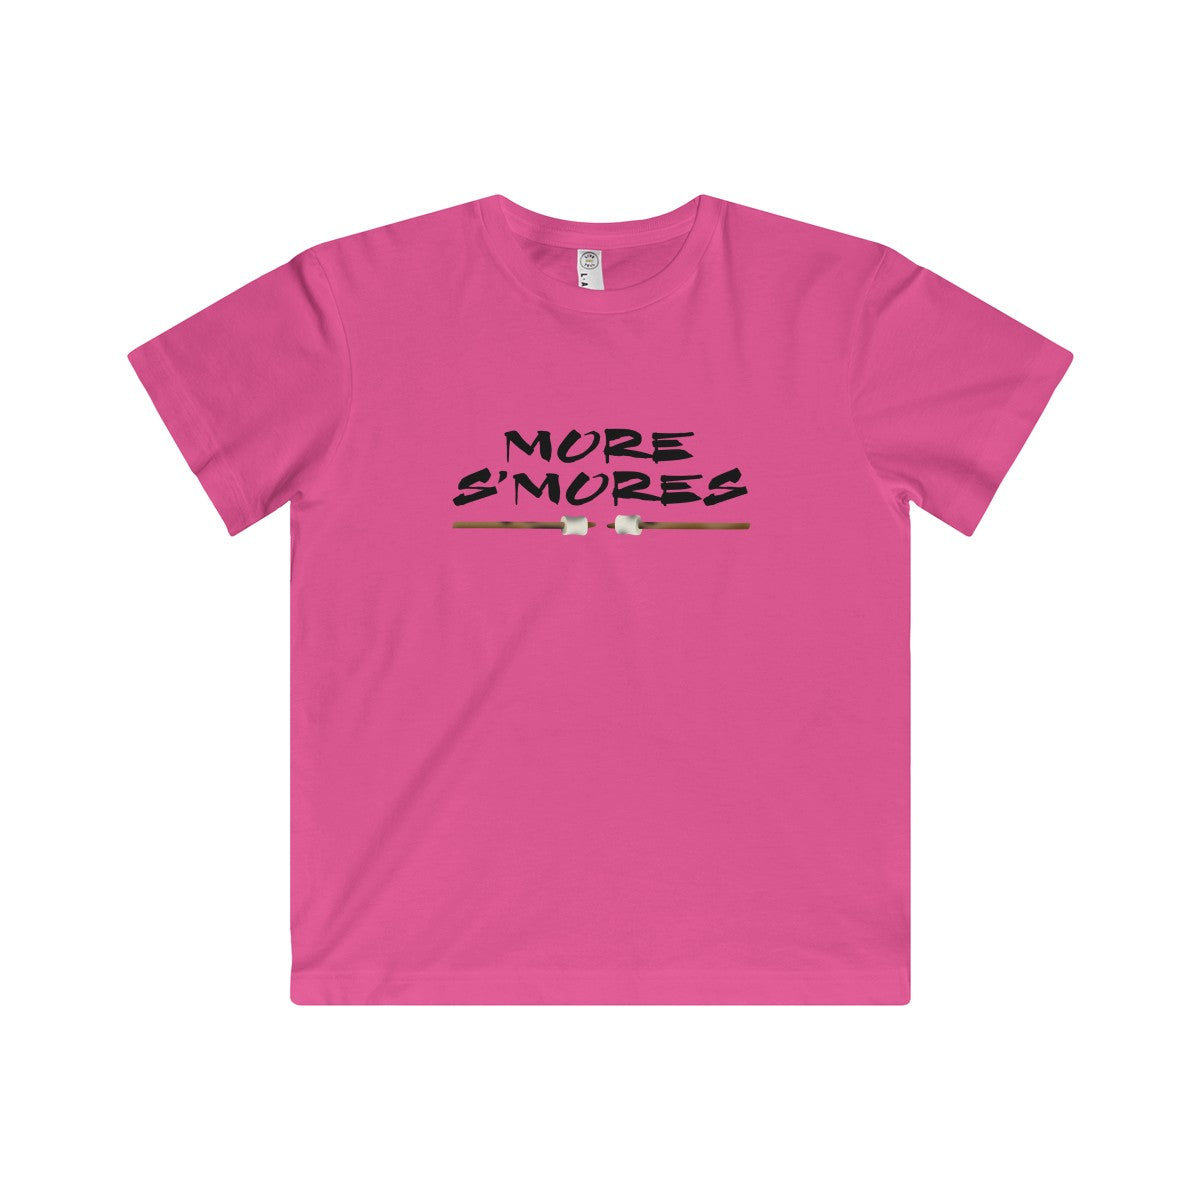 More S'mores Youth Fine Jersey Tee-Kids clothes-PureDesignTees